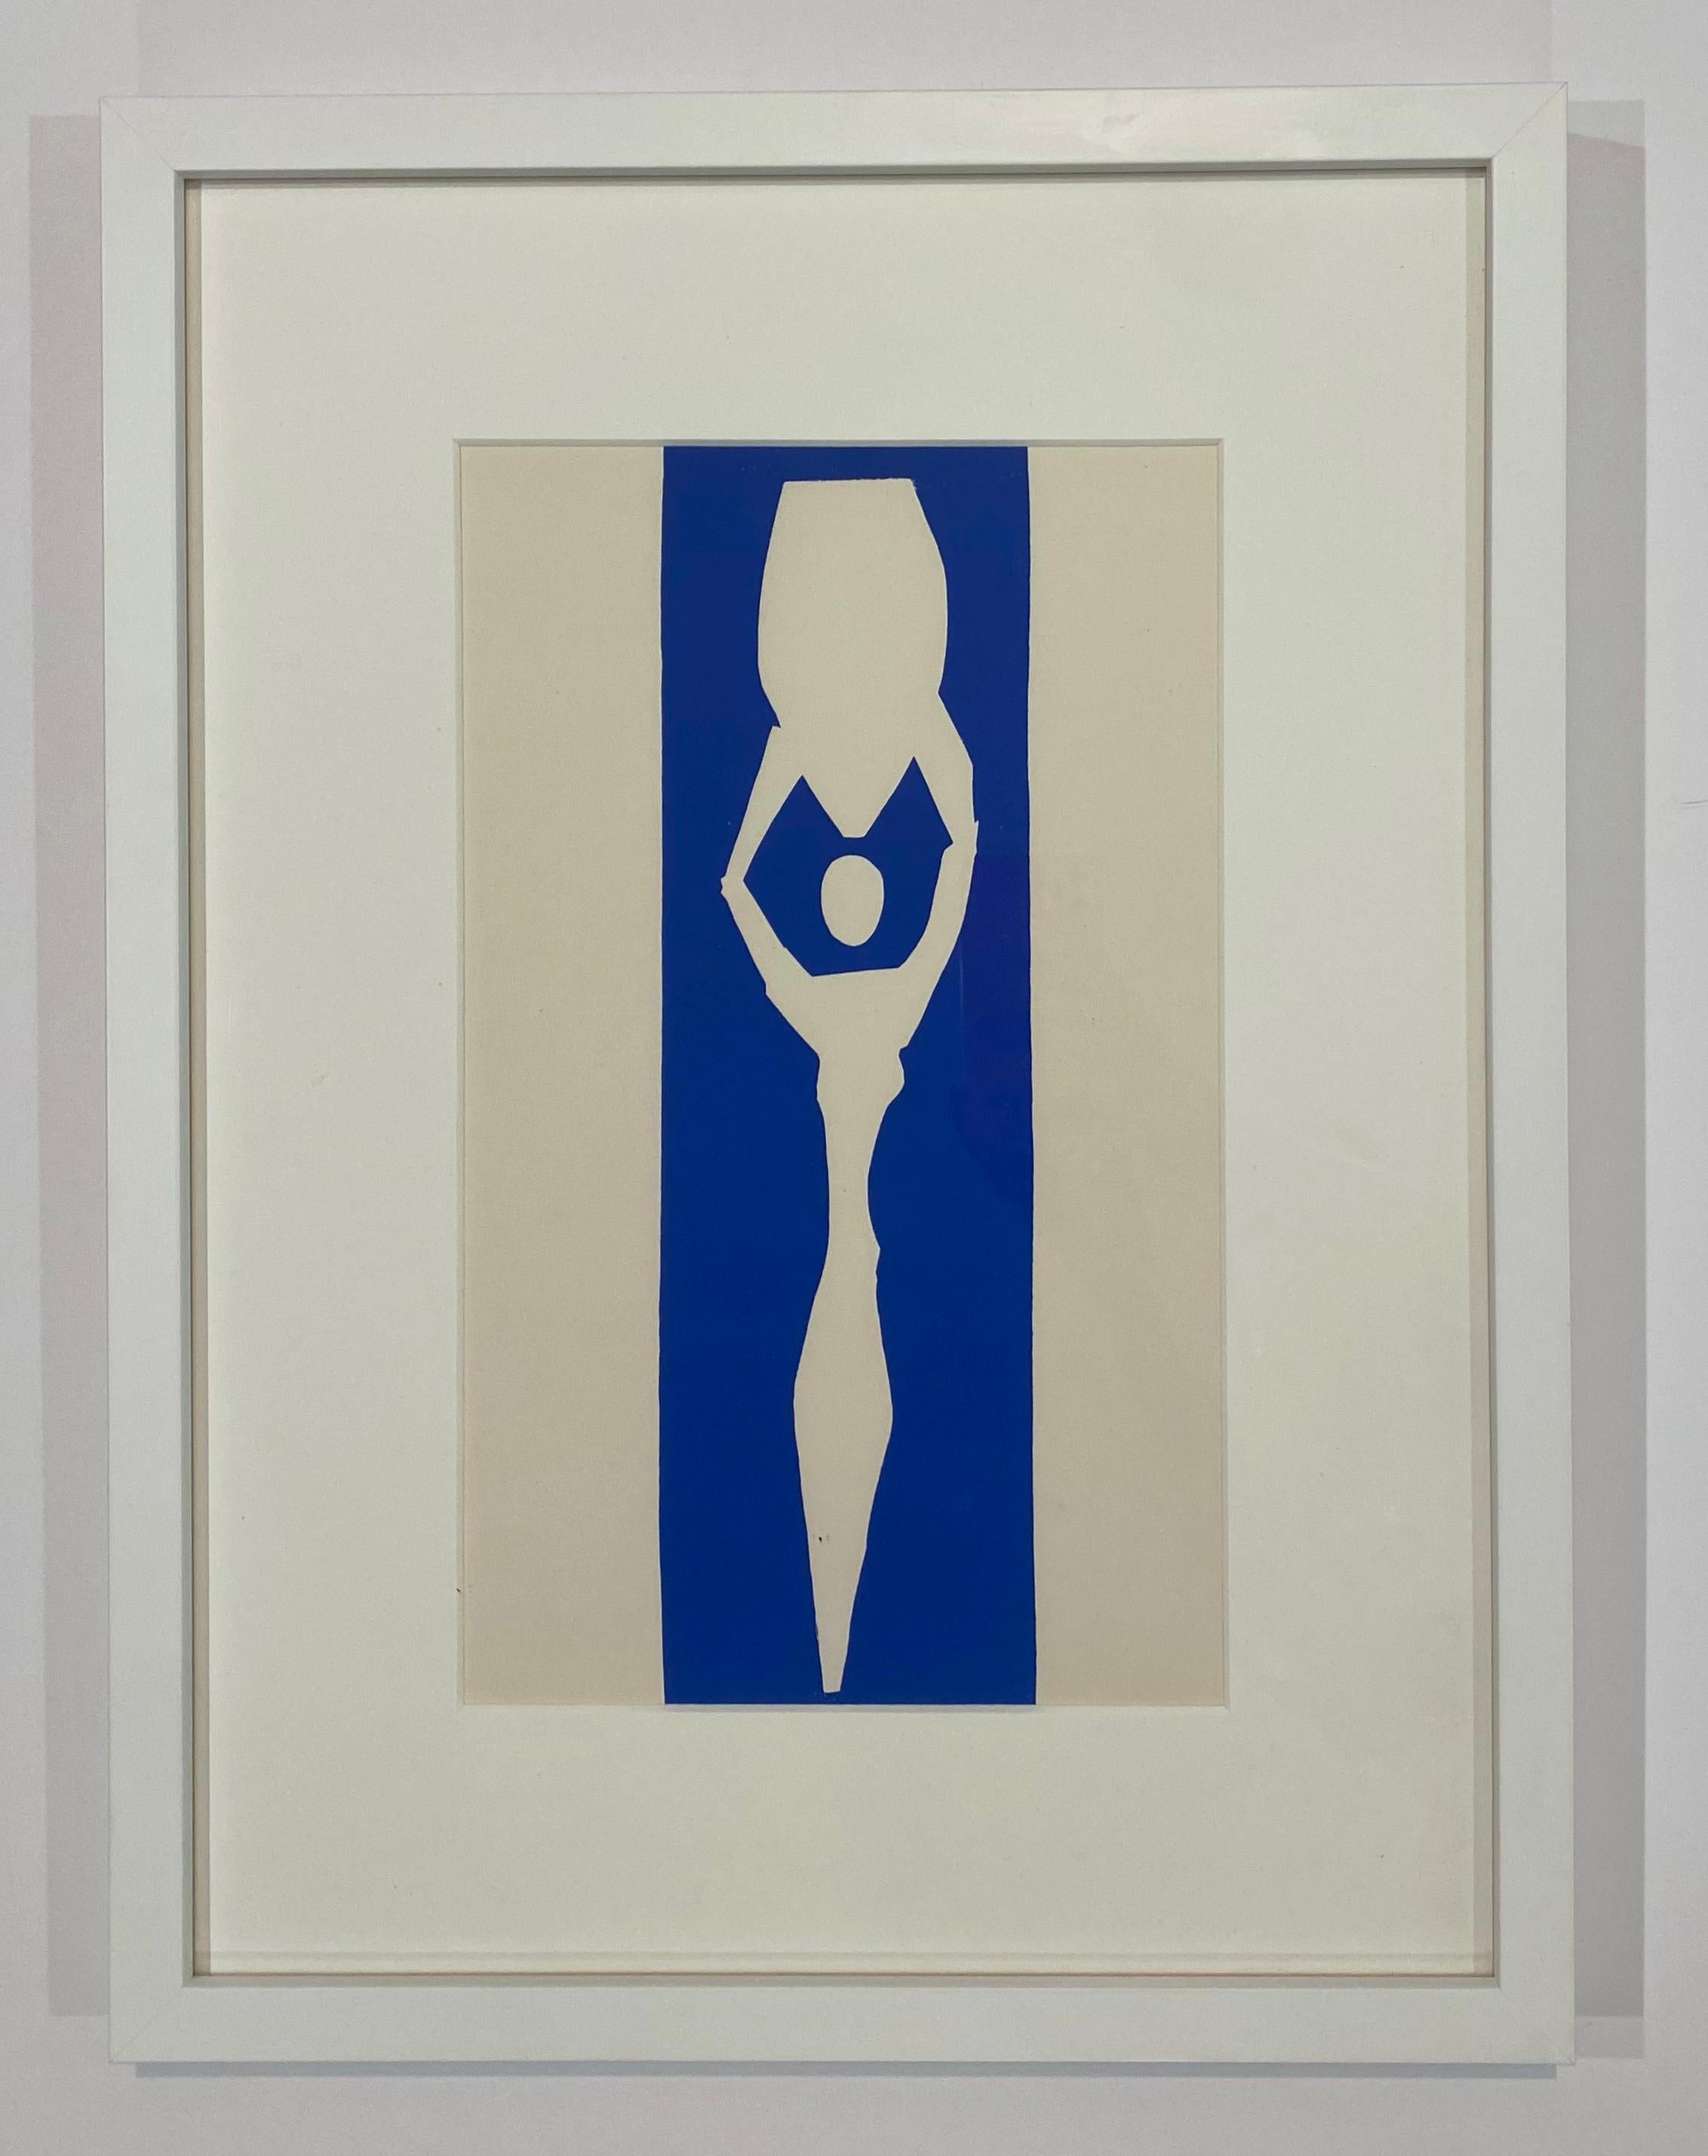 Le Jarre I, from 1958 The Last Works of Henri Matisse - Print by (after) Henri Matisse